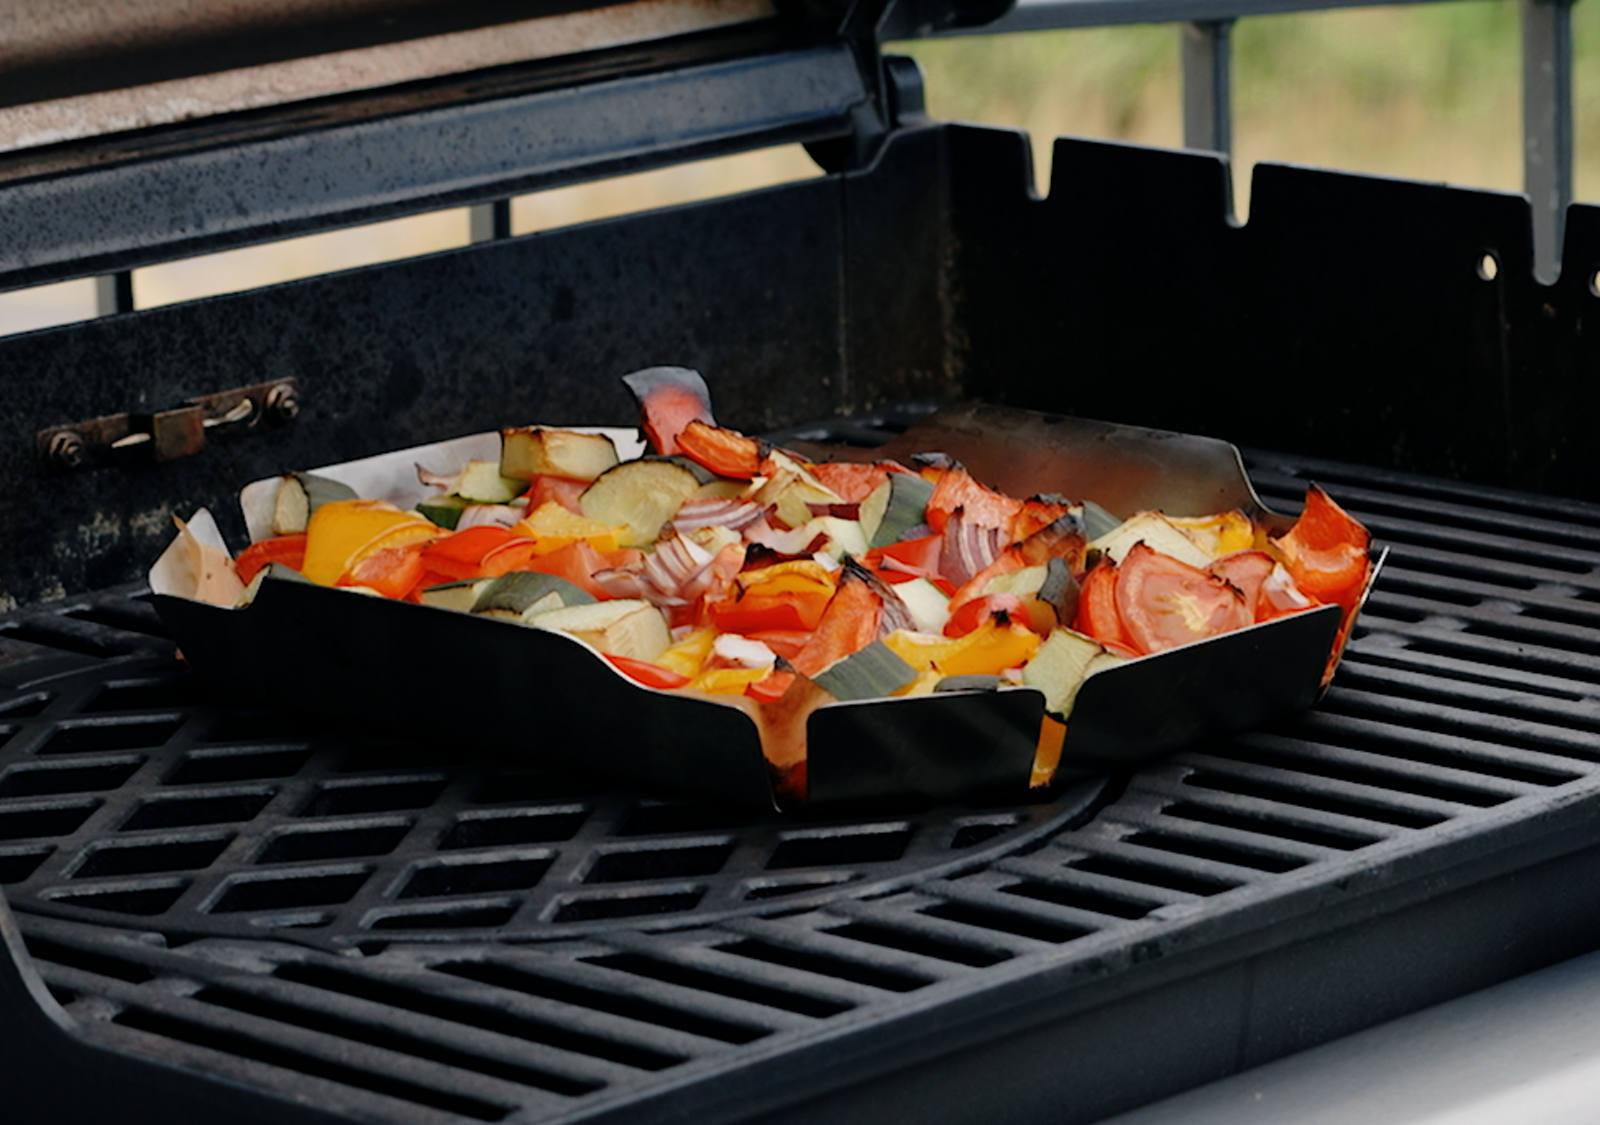 Vegetables are smoked on the grill